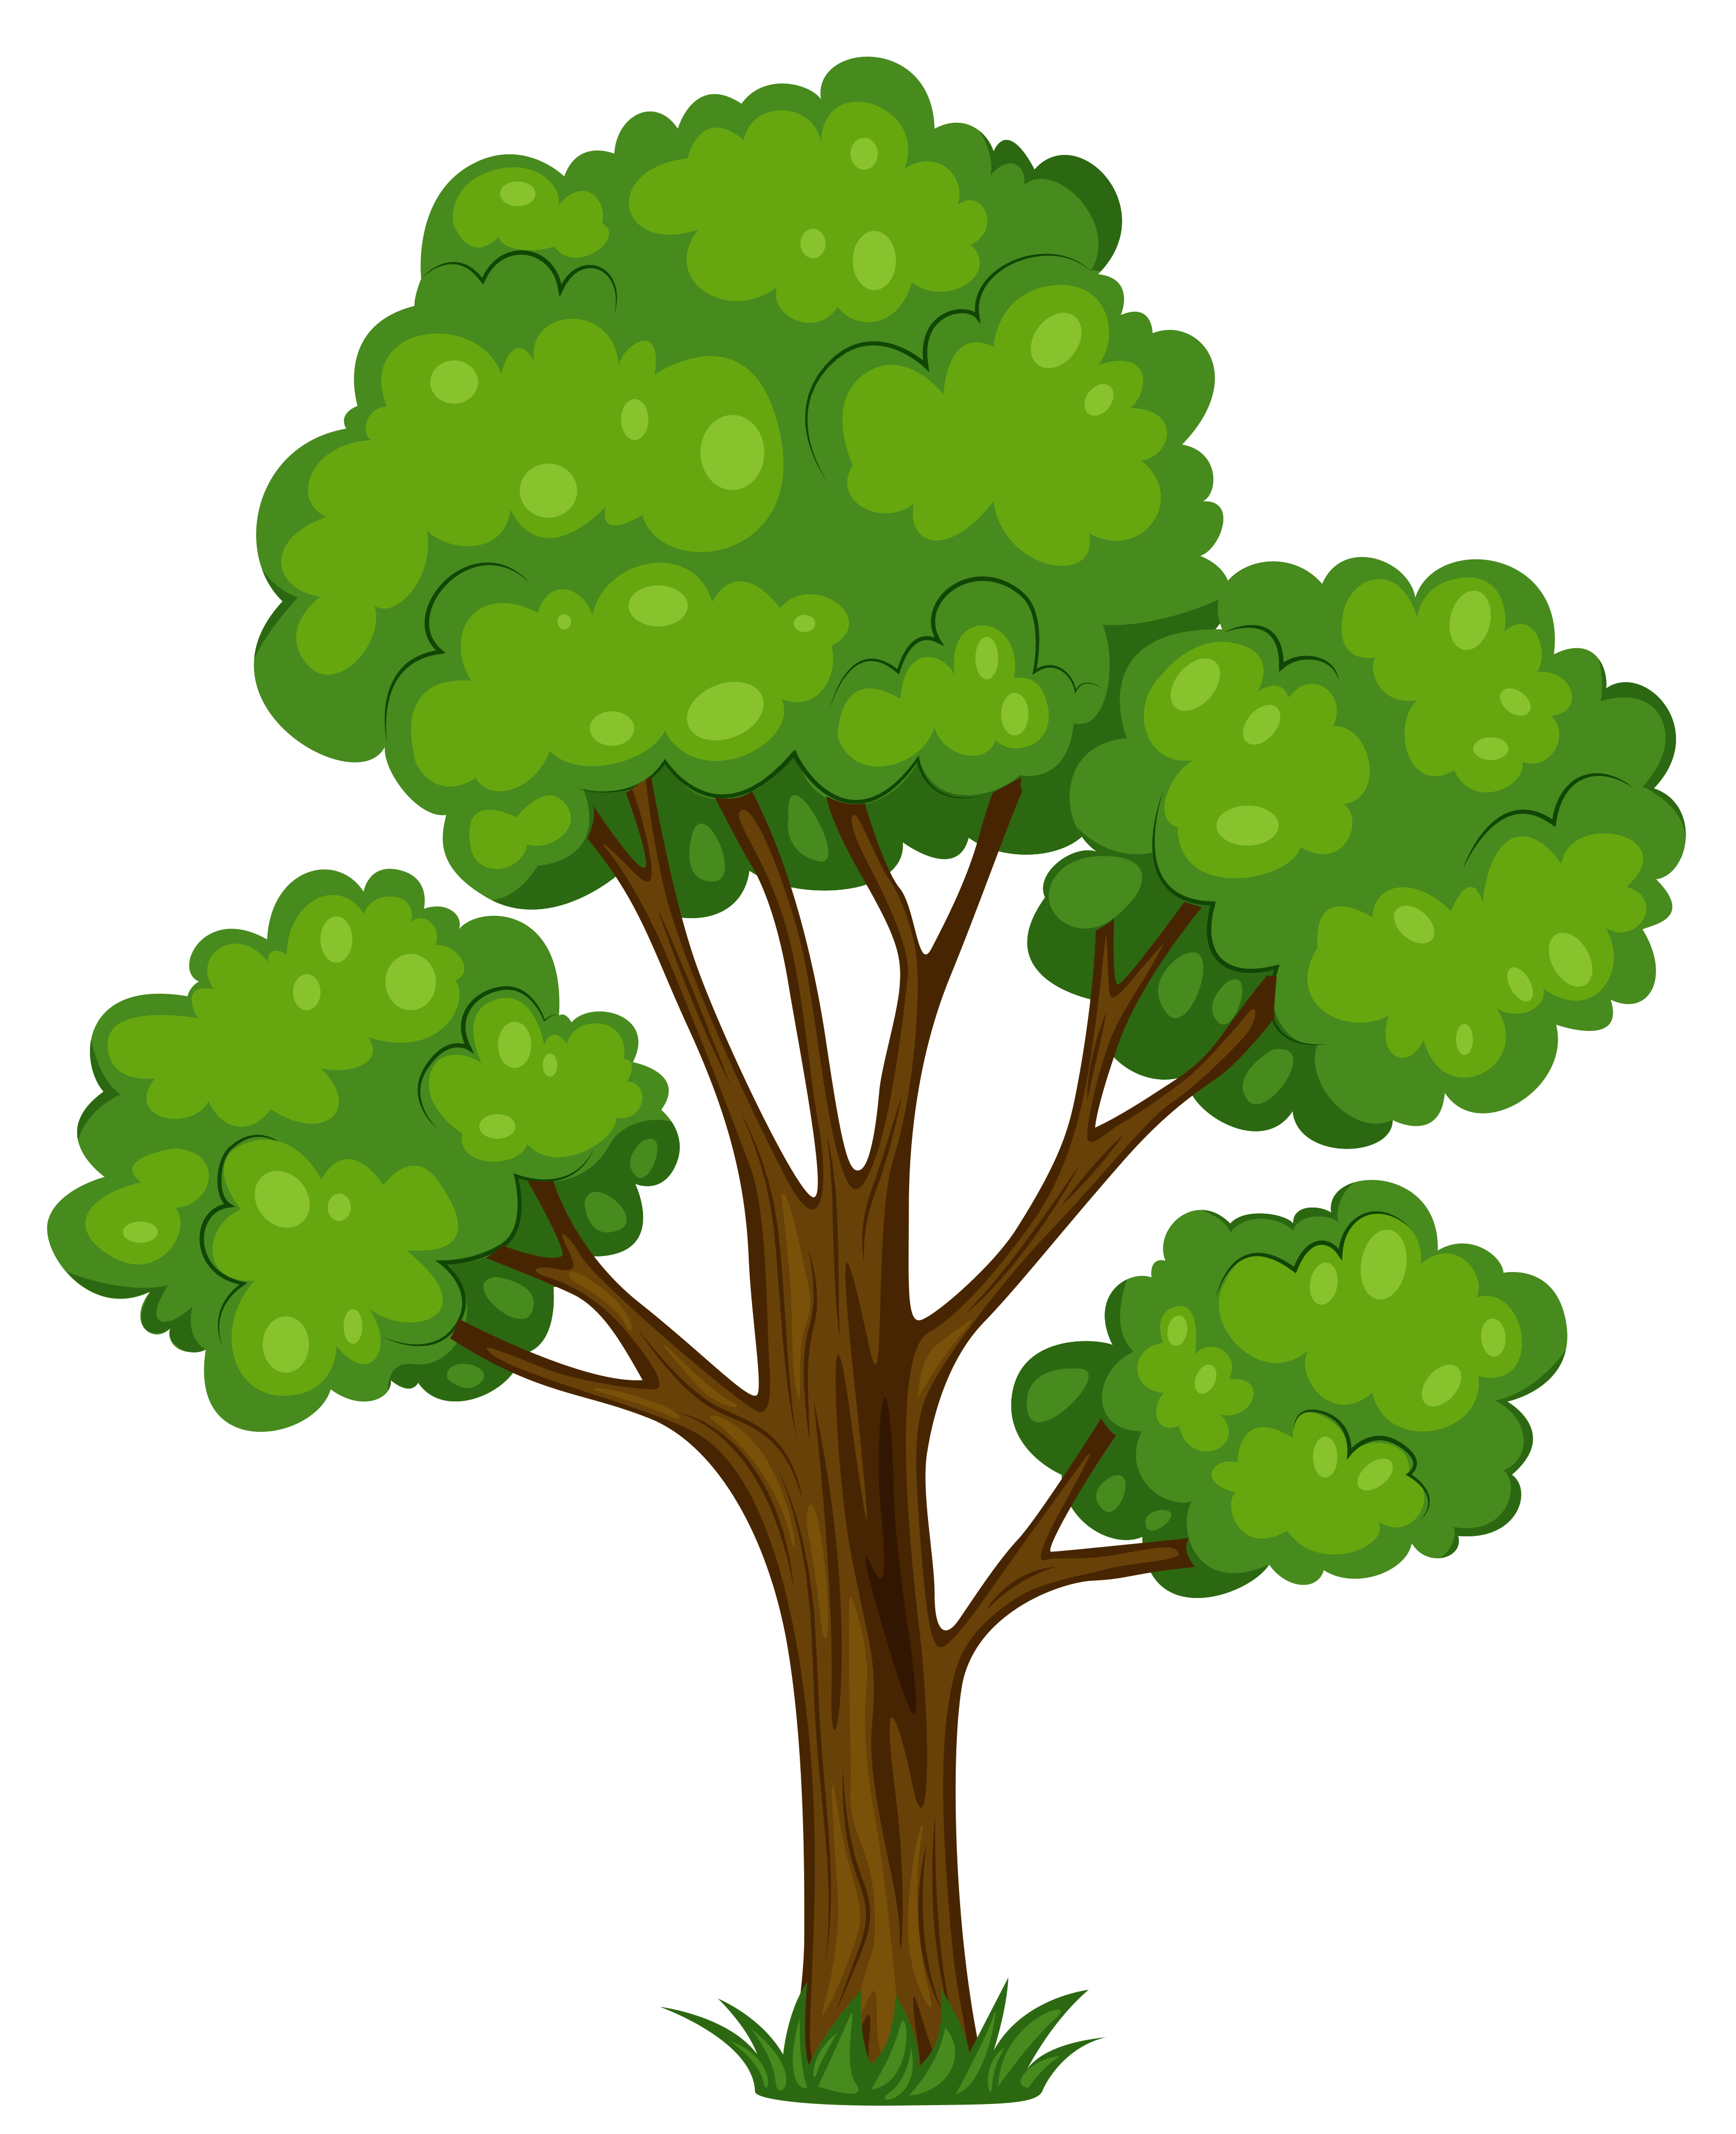 Tree and Grass PNG Clipart Im